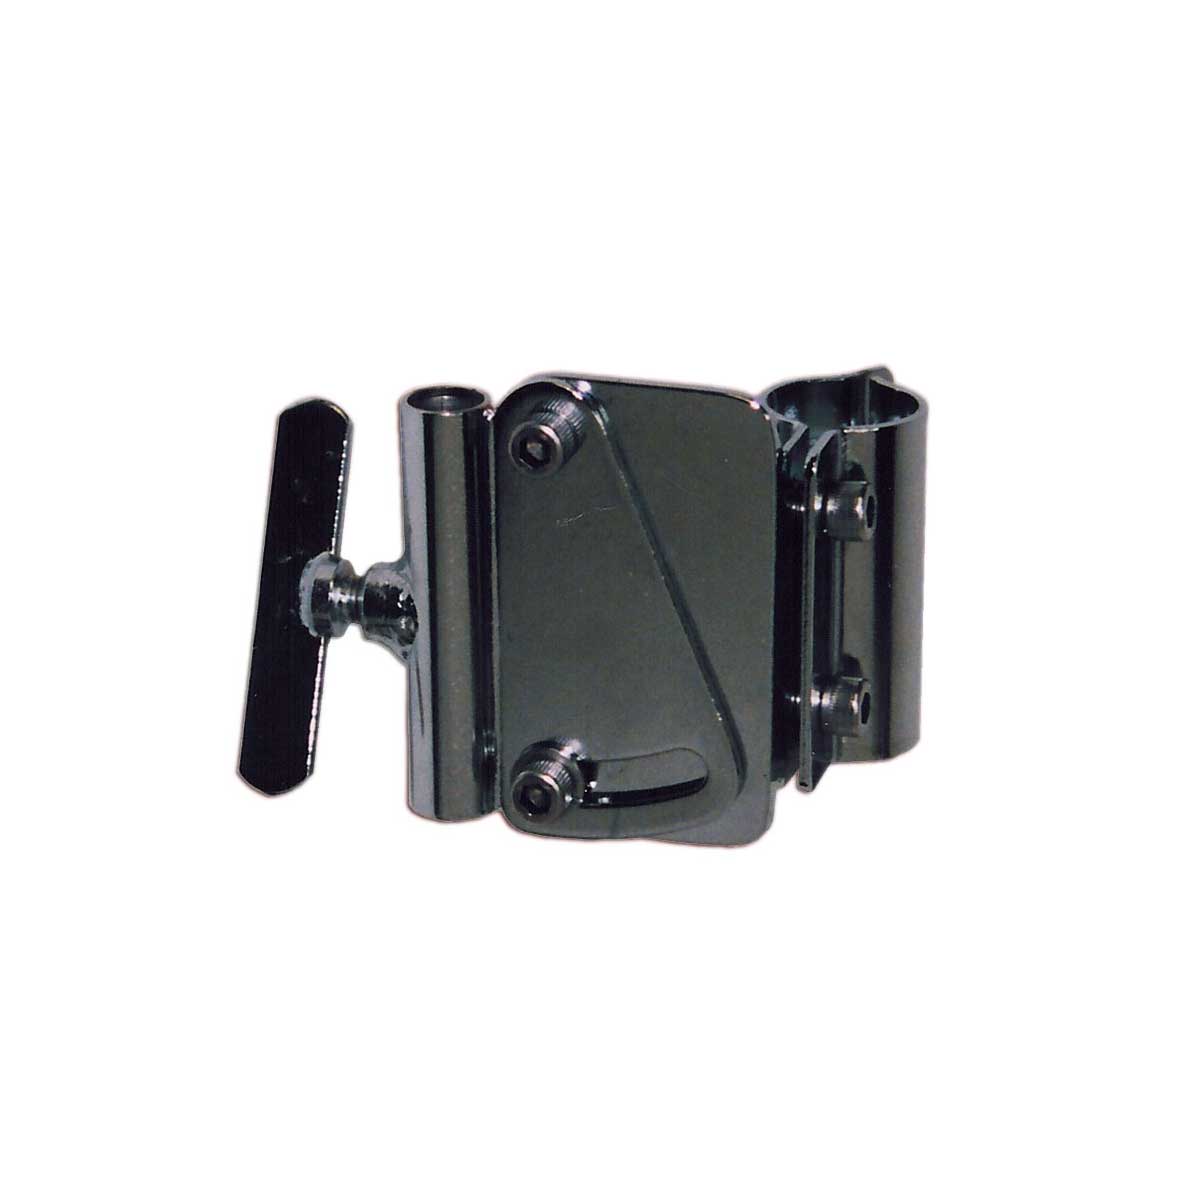 Adjustable Suspension Mount clamps to 7/8" wheelchair backrest tubing and supports suspension rod